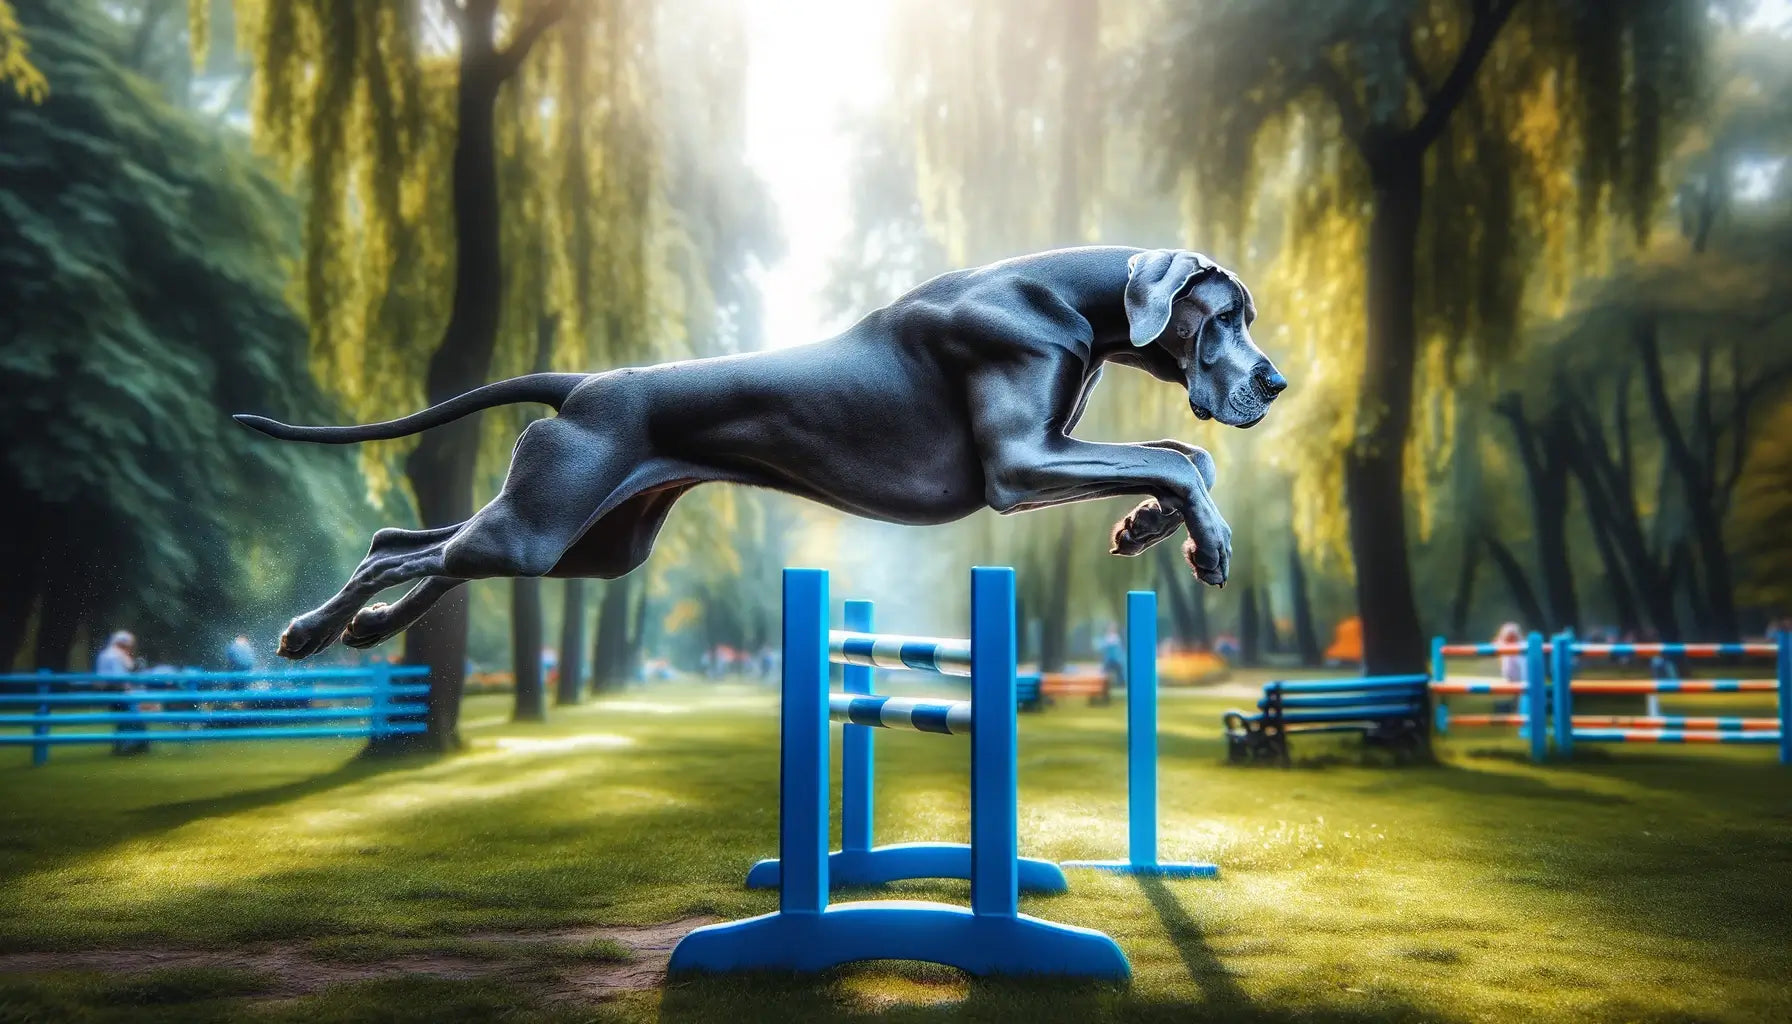 Blue Great Dane leaping over a hurdle in a park, showing agility and strength.